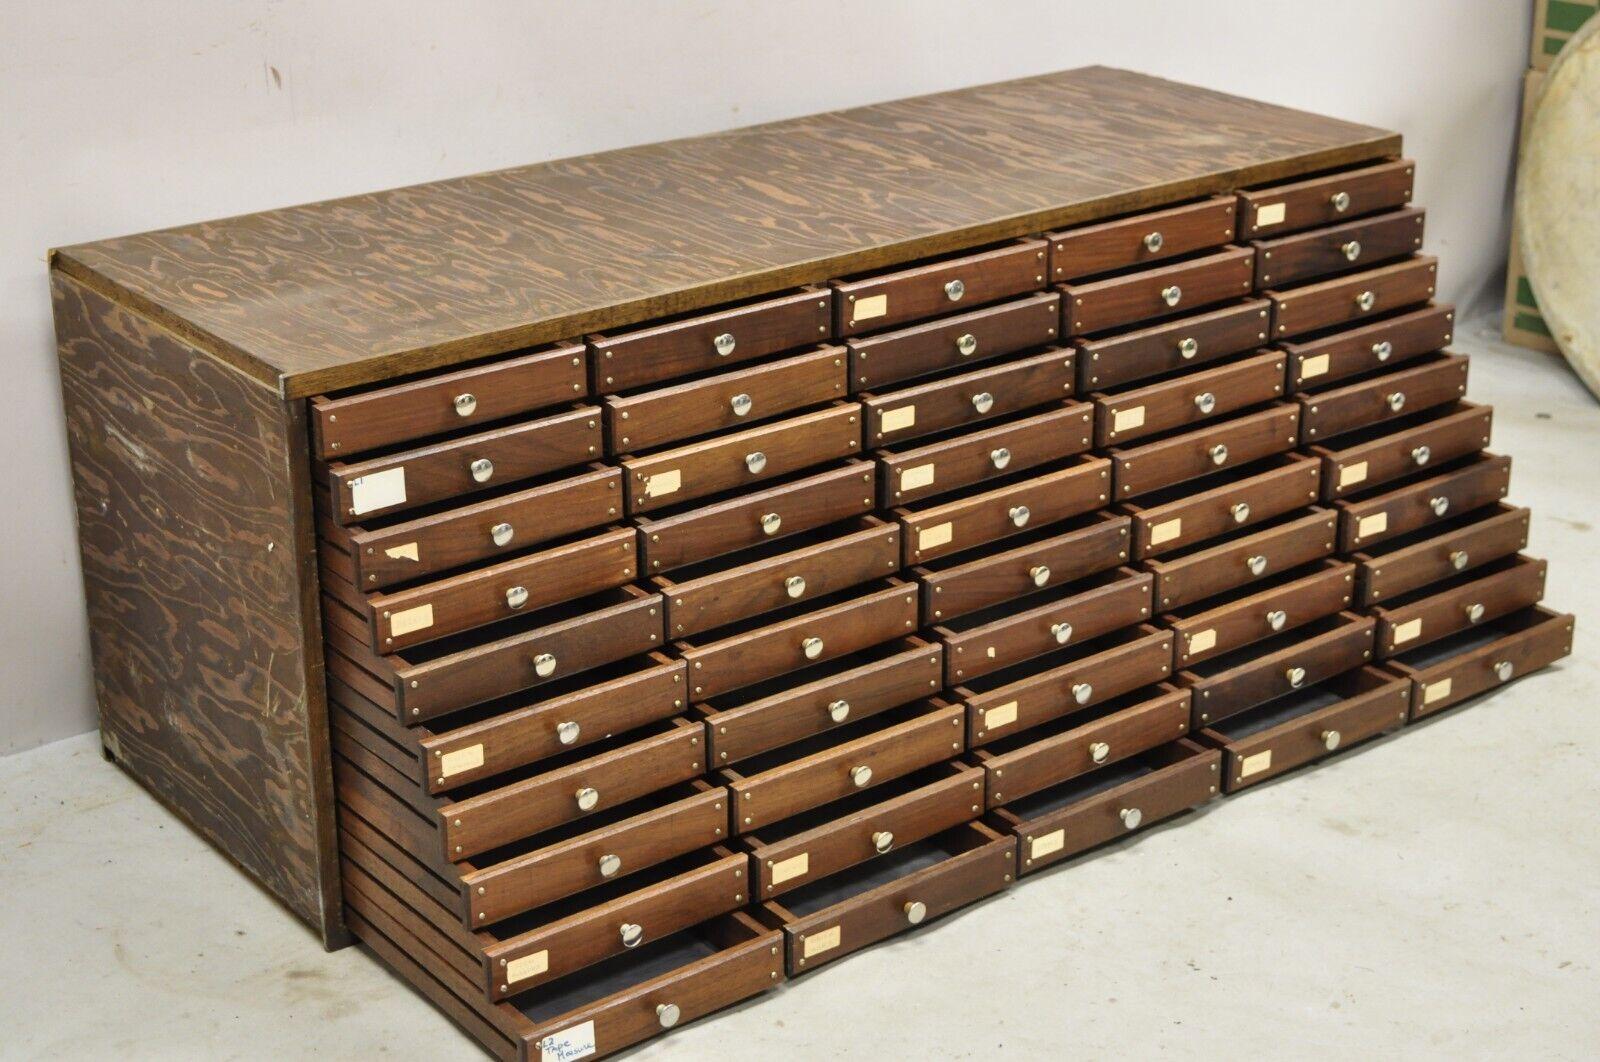 Vintage 50 Drawer Wooden Watchmakers Parts Tool Cabinet Storage Chest. Item features 50 metal lined drawers, lots of storage, quality craftsmanship. Circa Mid to late 20th century. Measurements: 18